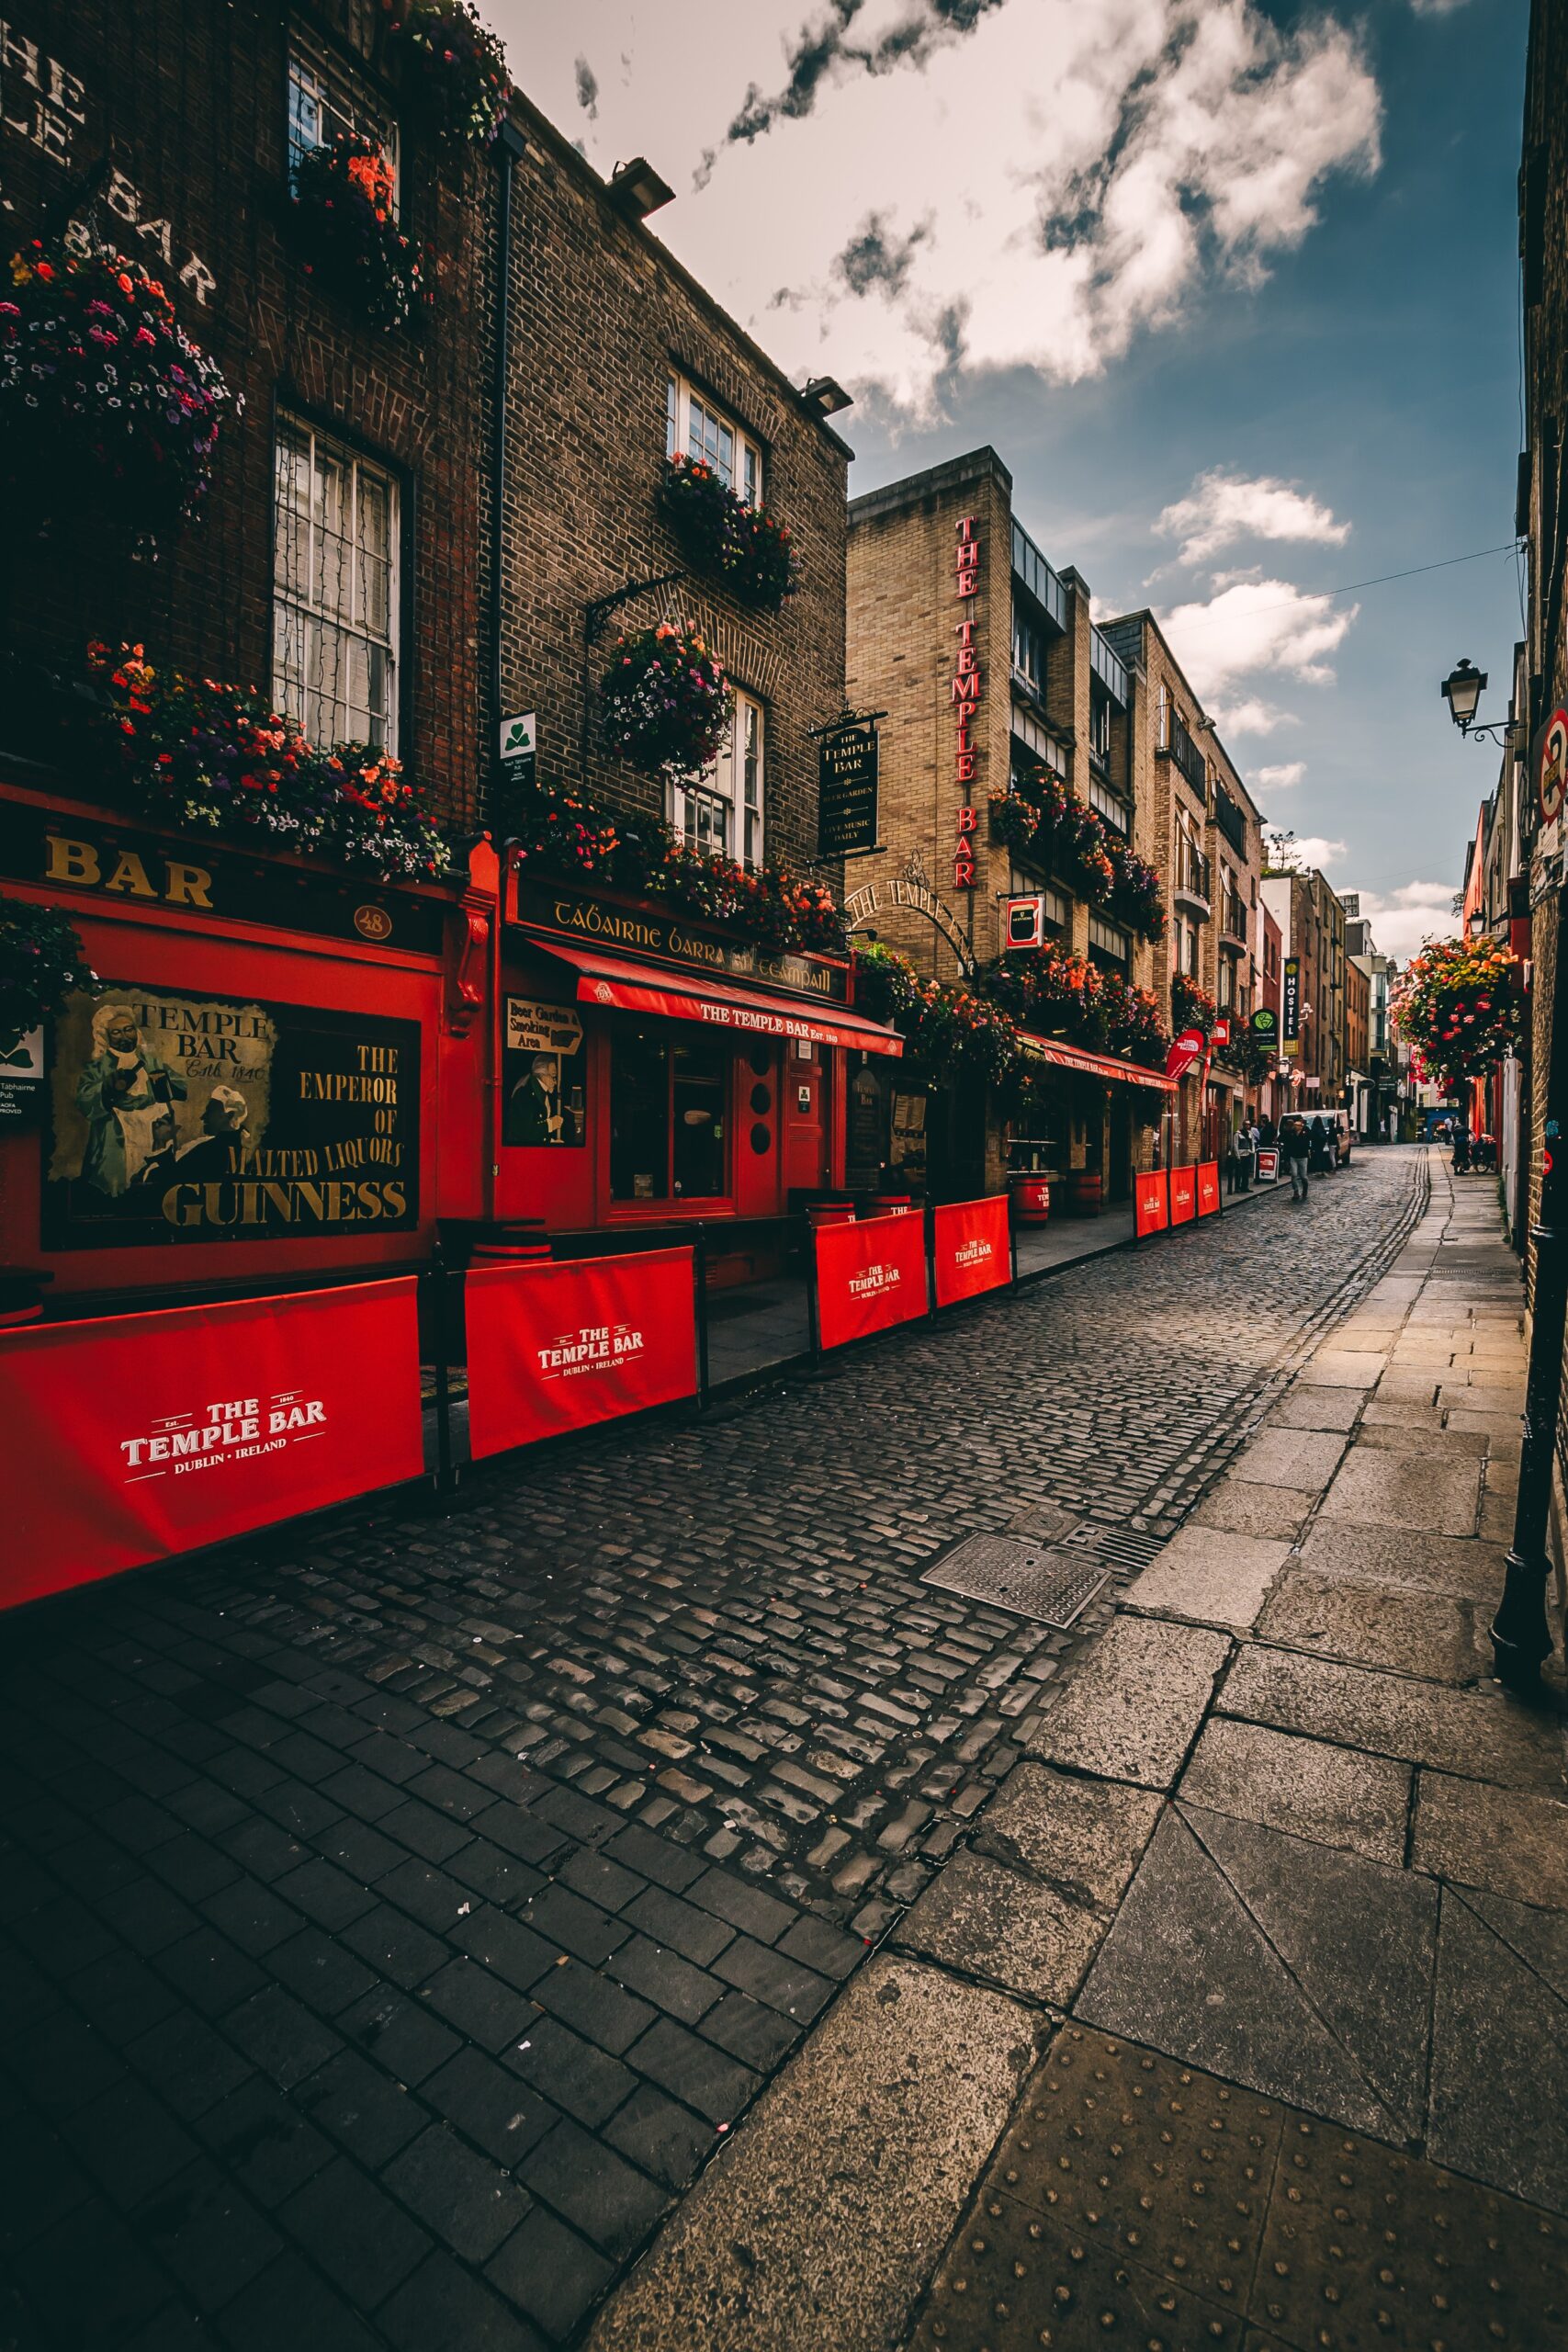 Temple bar is a hip area in Dublin that attracts tourists who want to sightsee and enjoy bars and nightlife. 